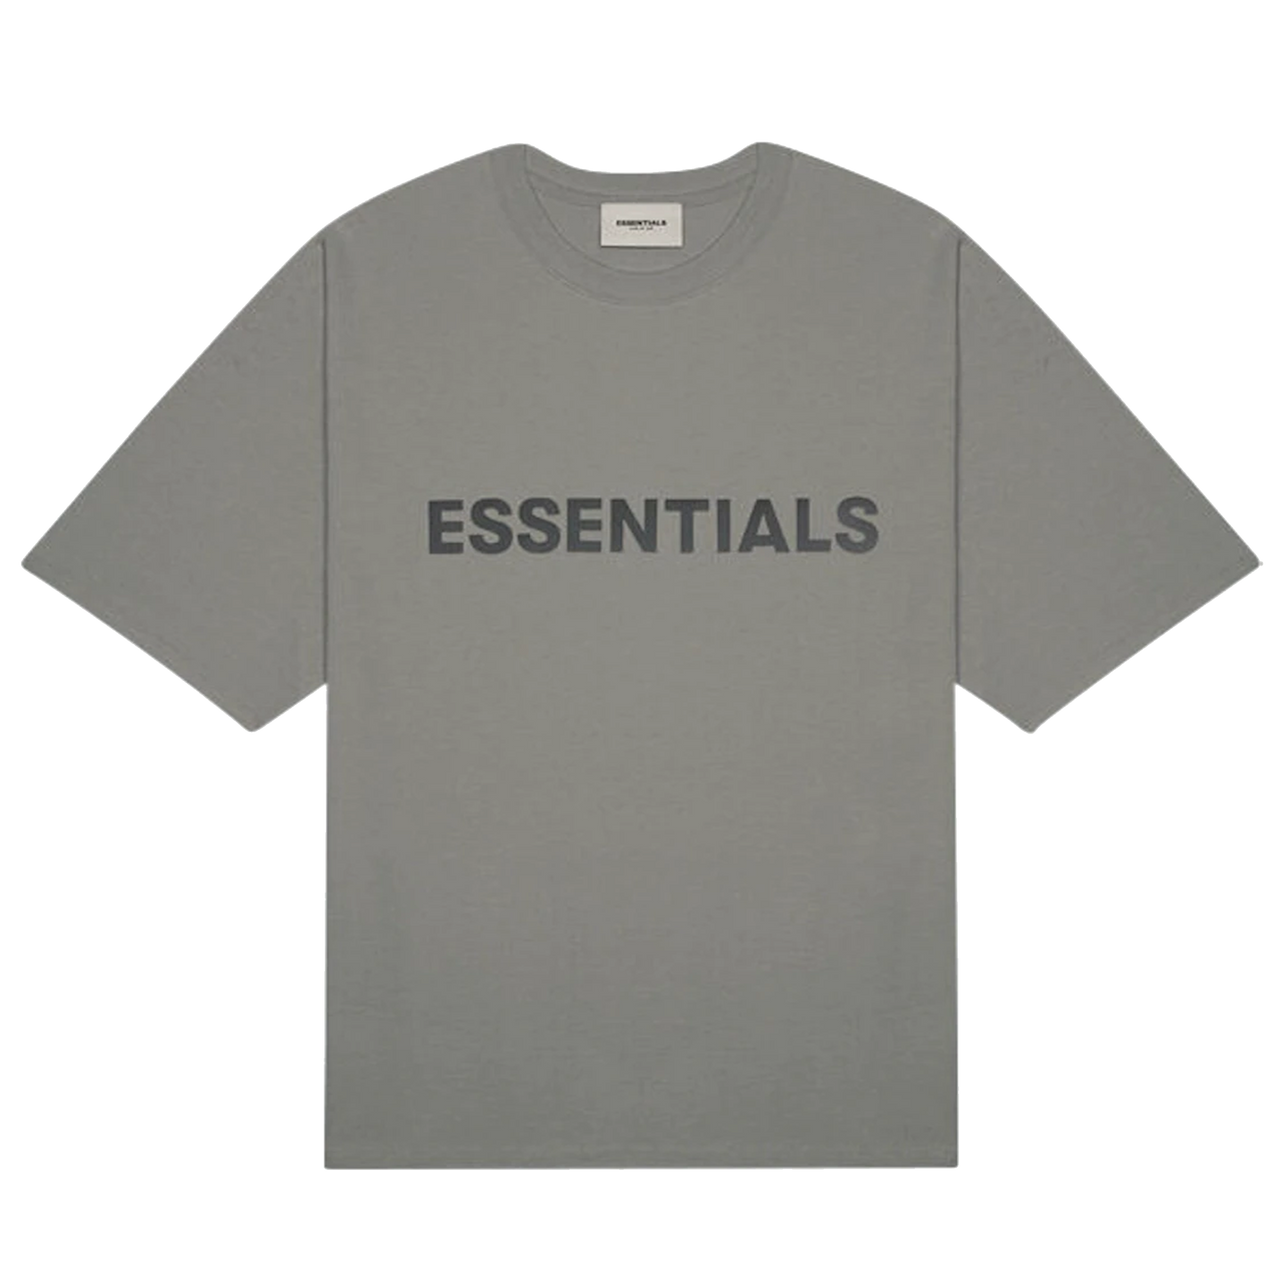 Essentials SS20 Tee Charcoal